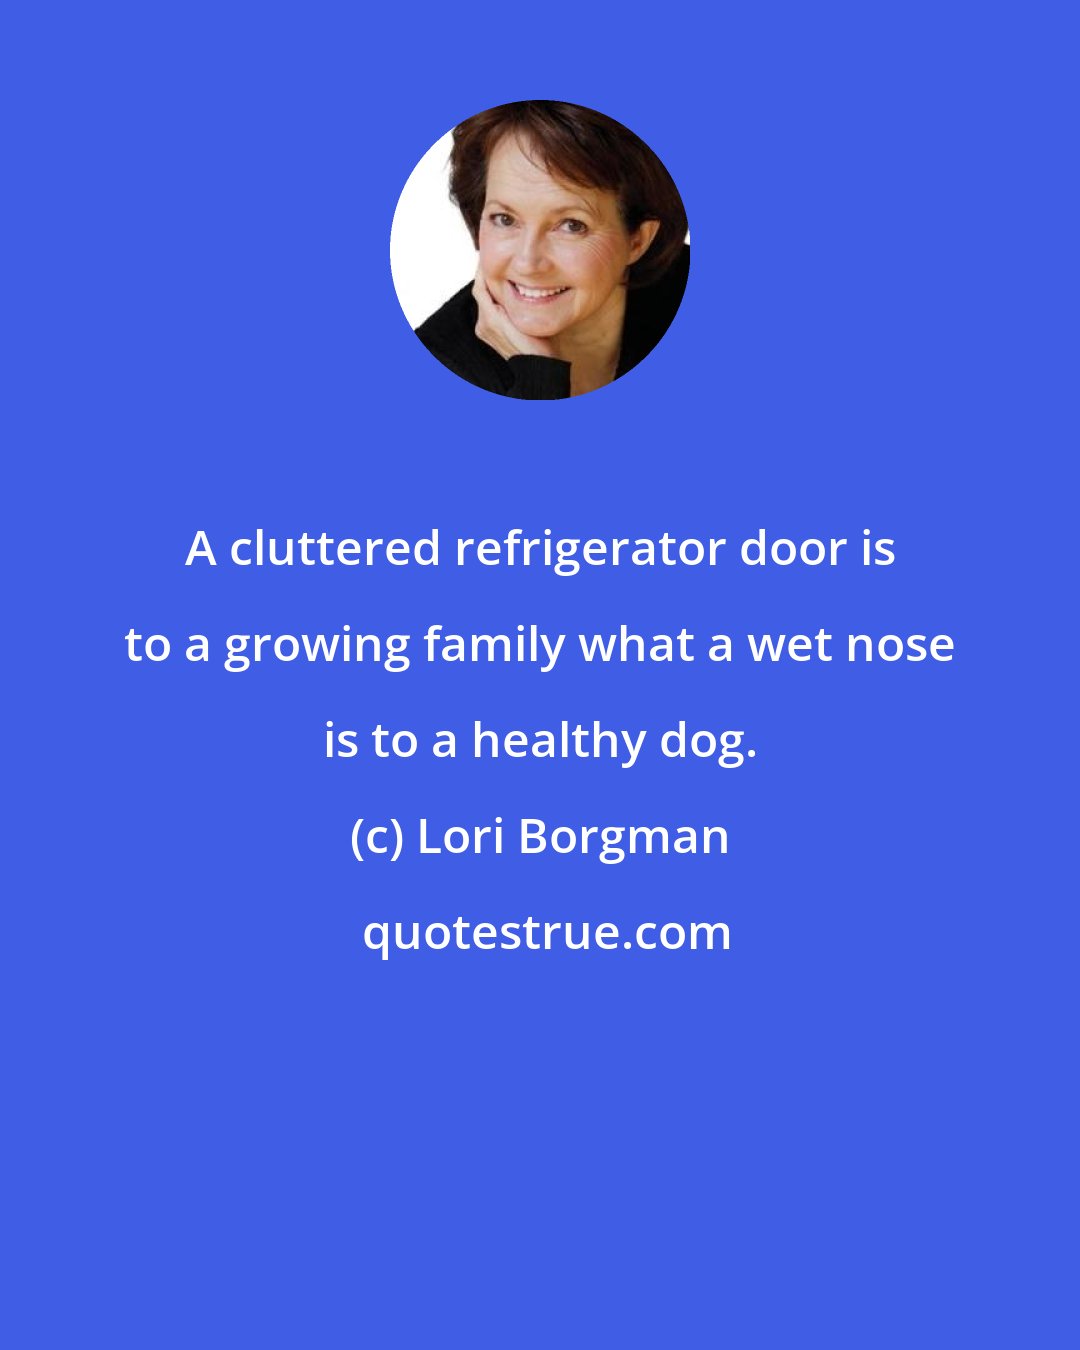 Lori Borgman: A cluttered refrigerator door is to a growing family what a wet nose is to a healthy dog.